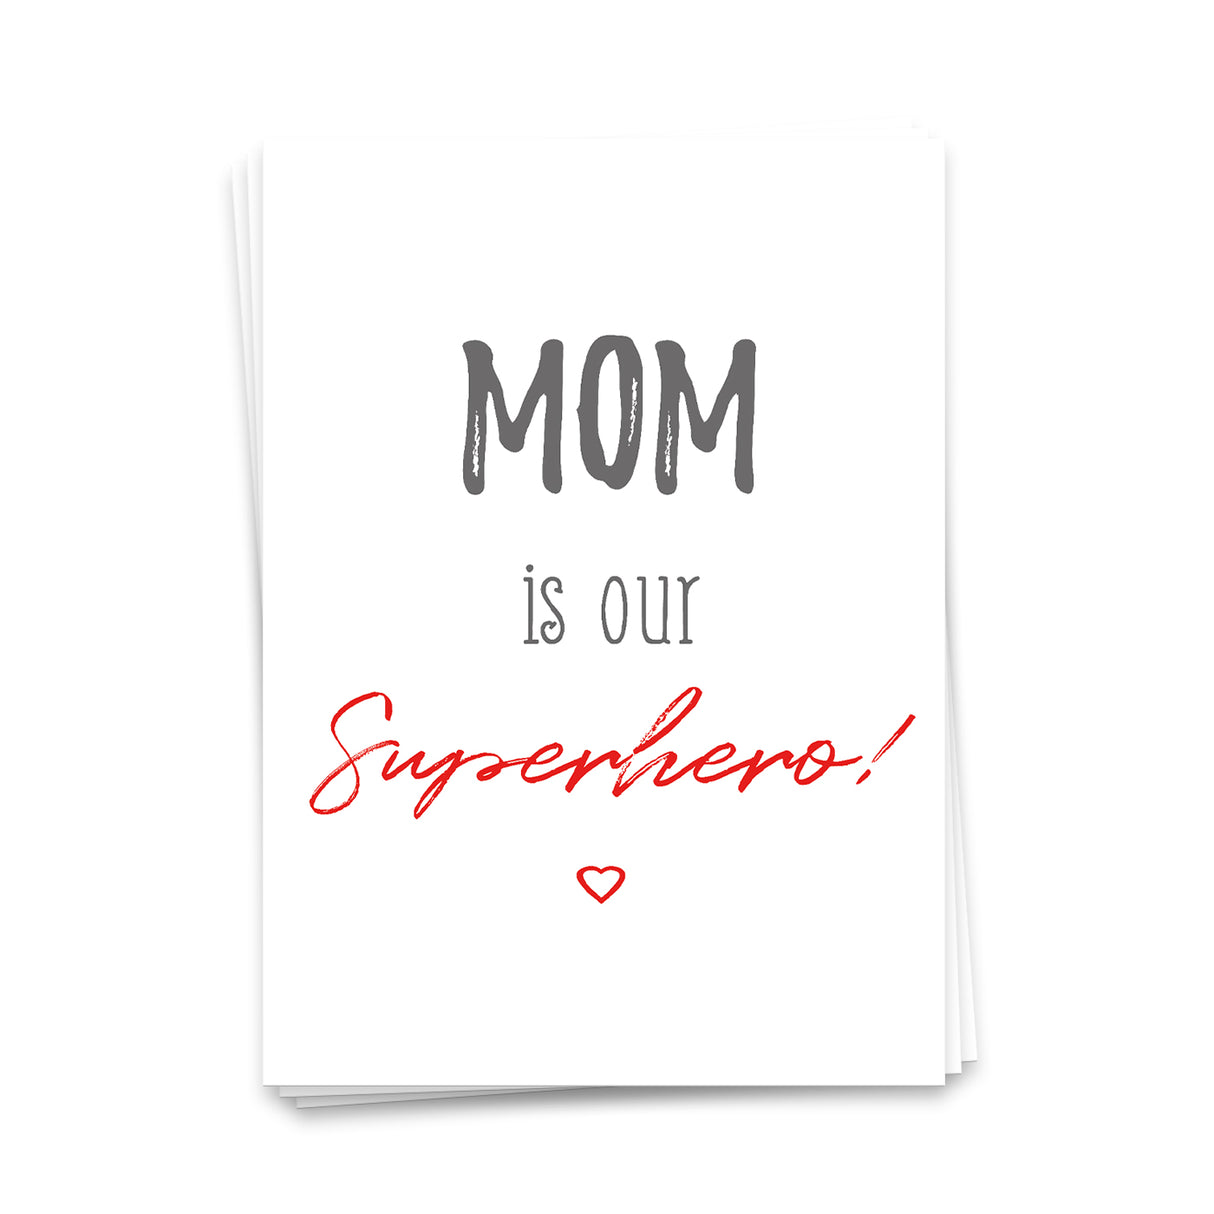 Mom is our superhero